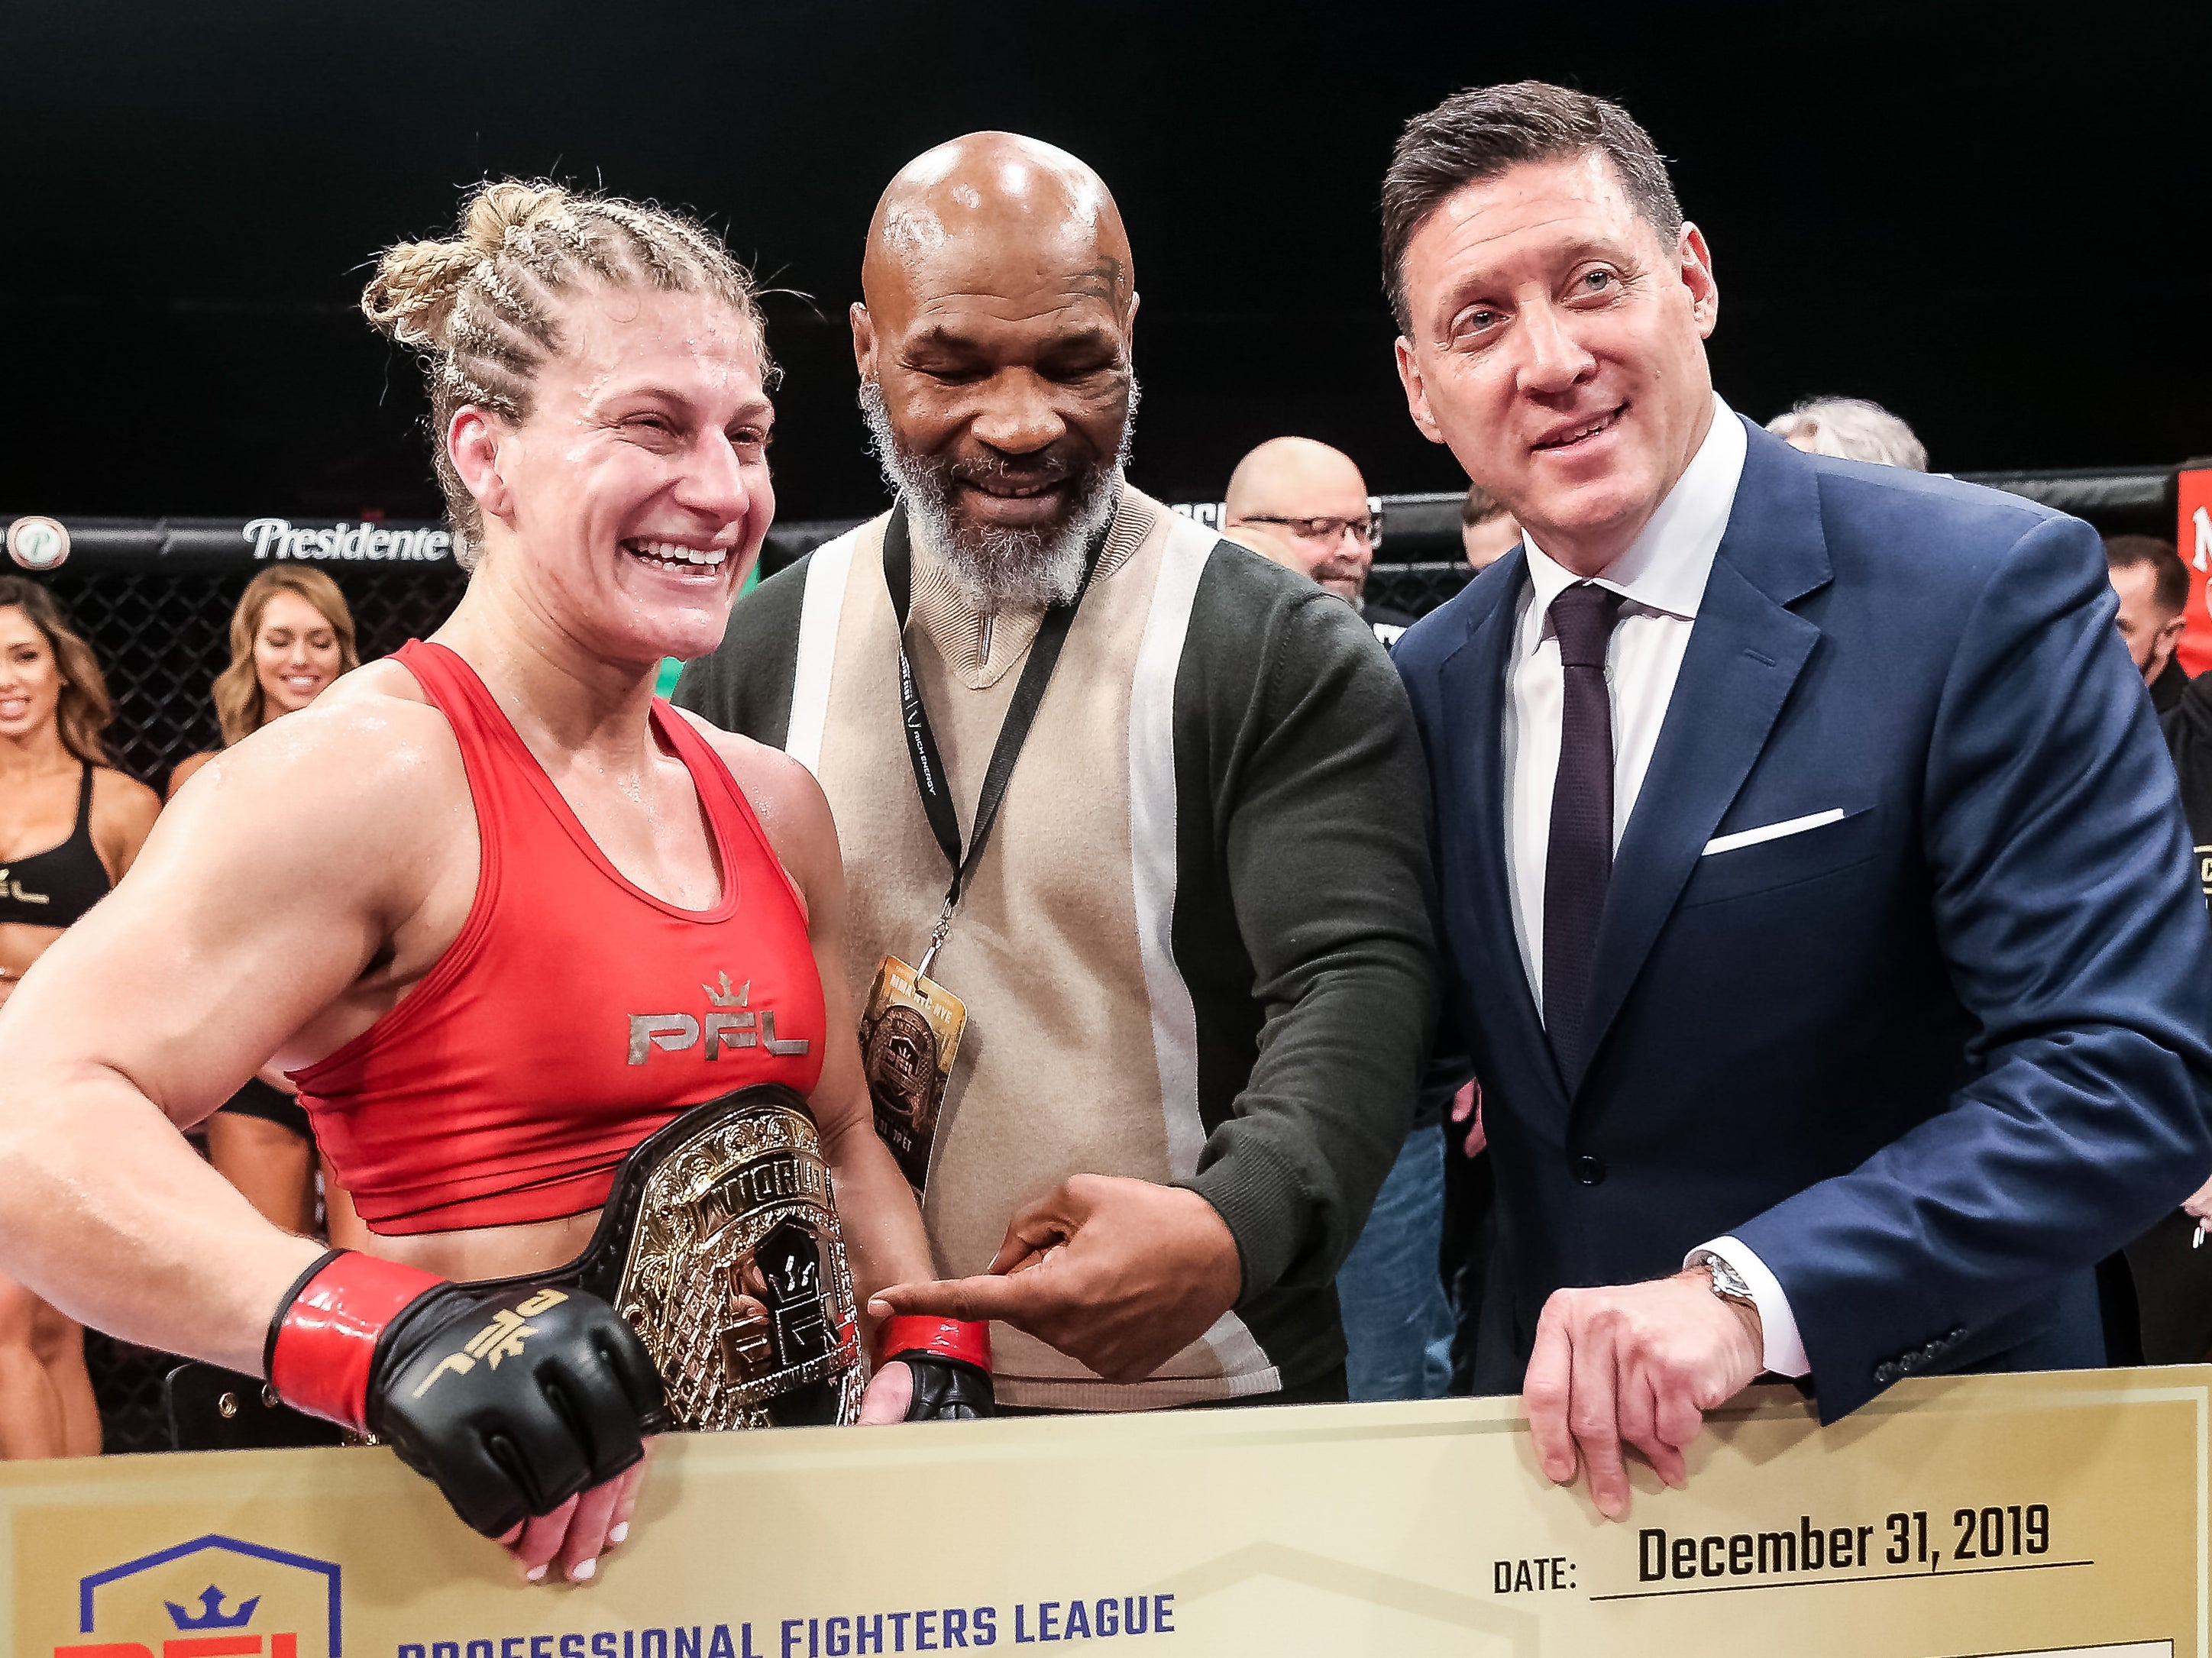 Mike Tyson (centre) with PFL women’s lightweight champion Kayla Harrison and CEO Peter Murray